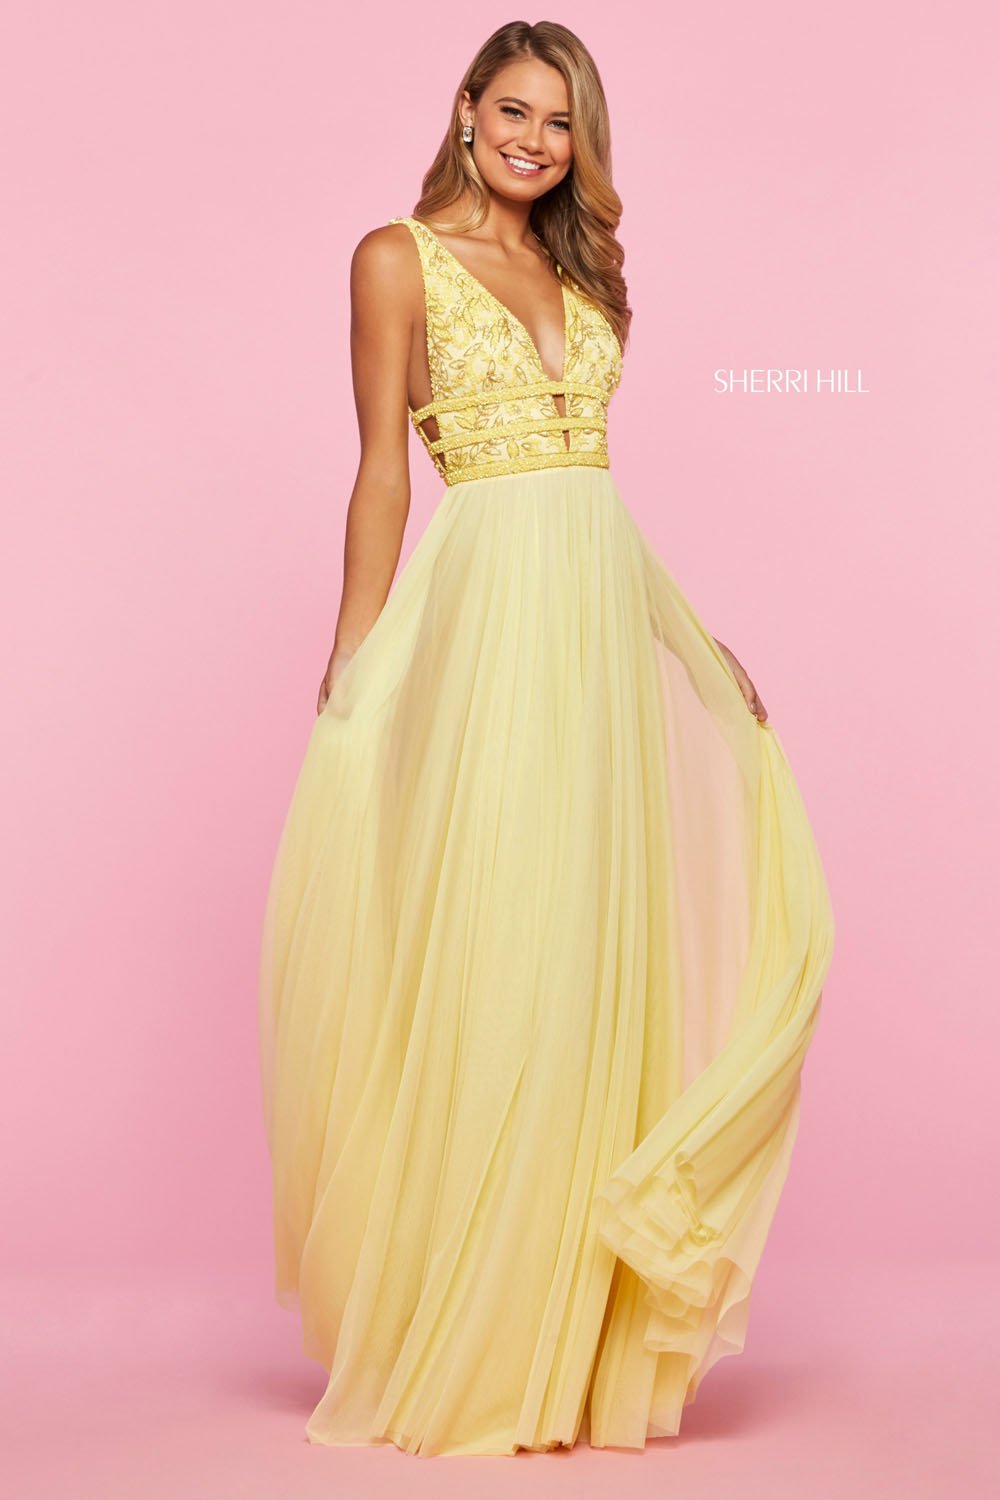 Sherri Hill 53551 dress images in these colors: Light Pink, Light Blue, Yellow, Nude Ivory.